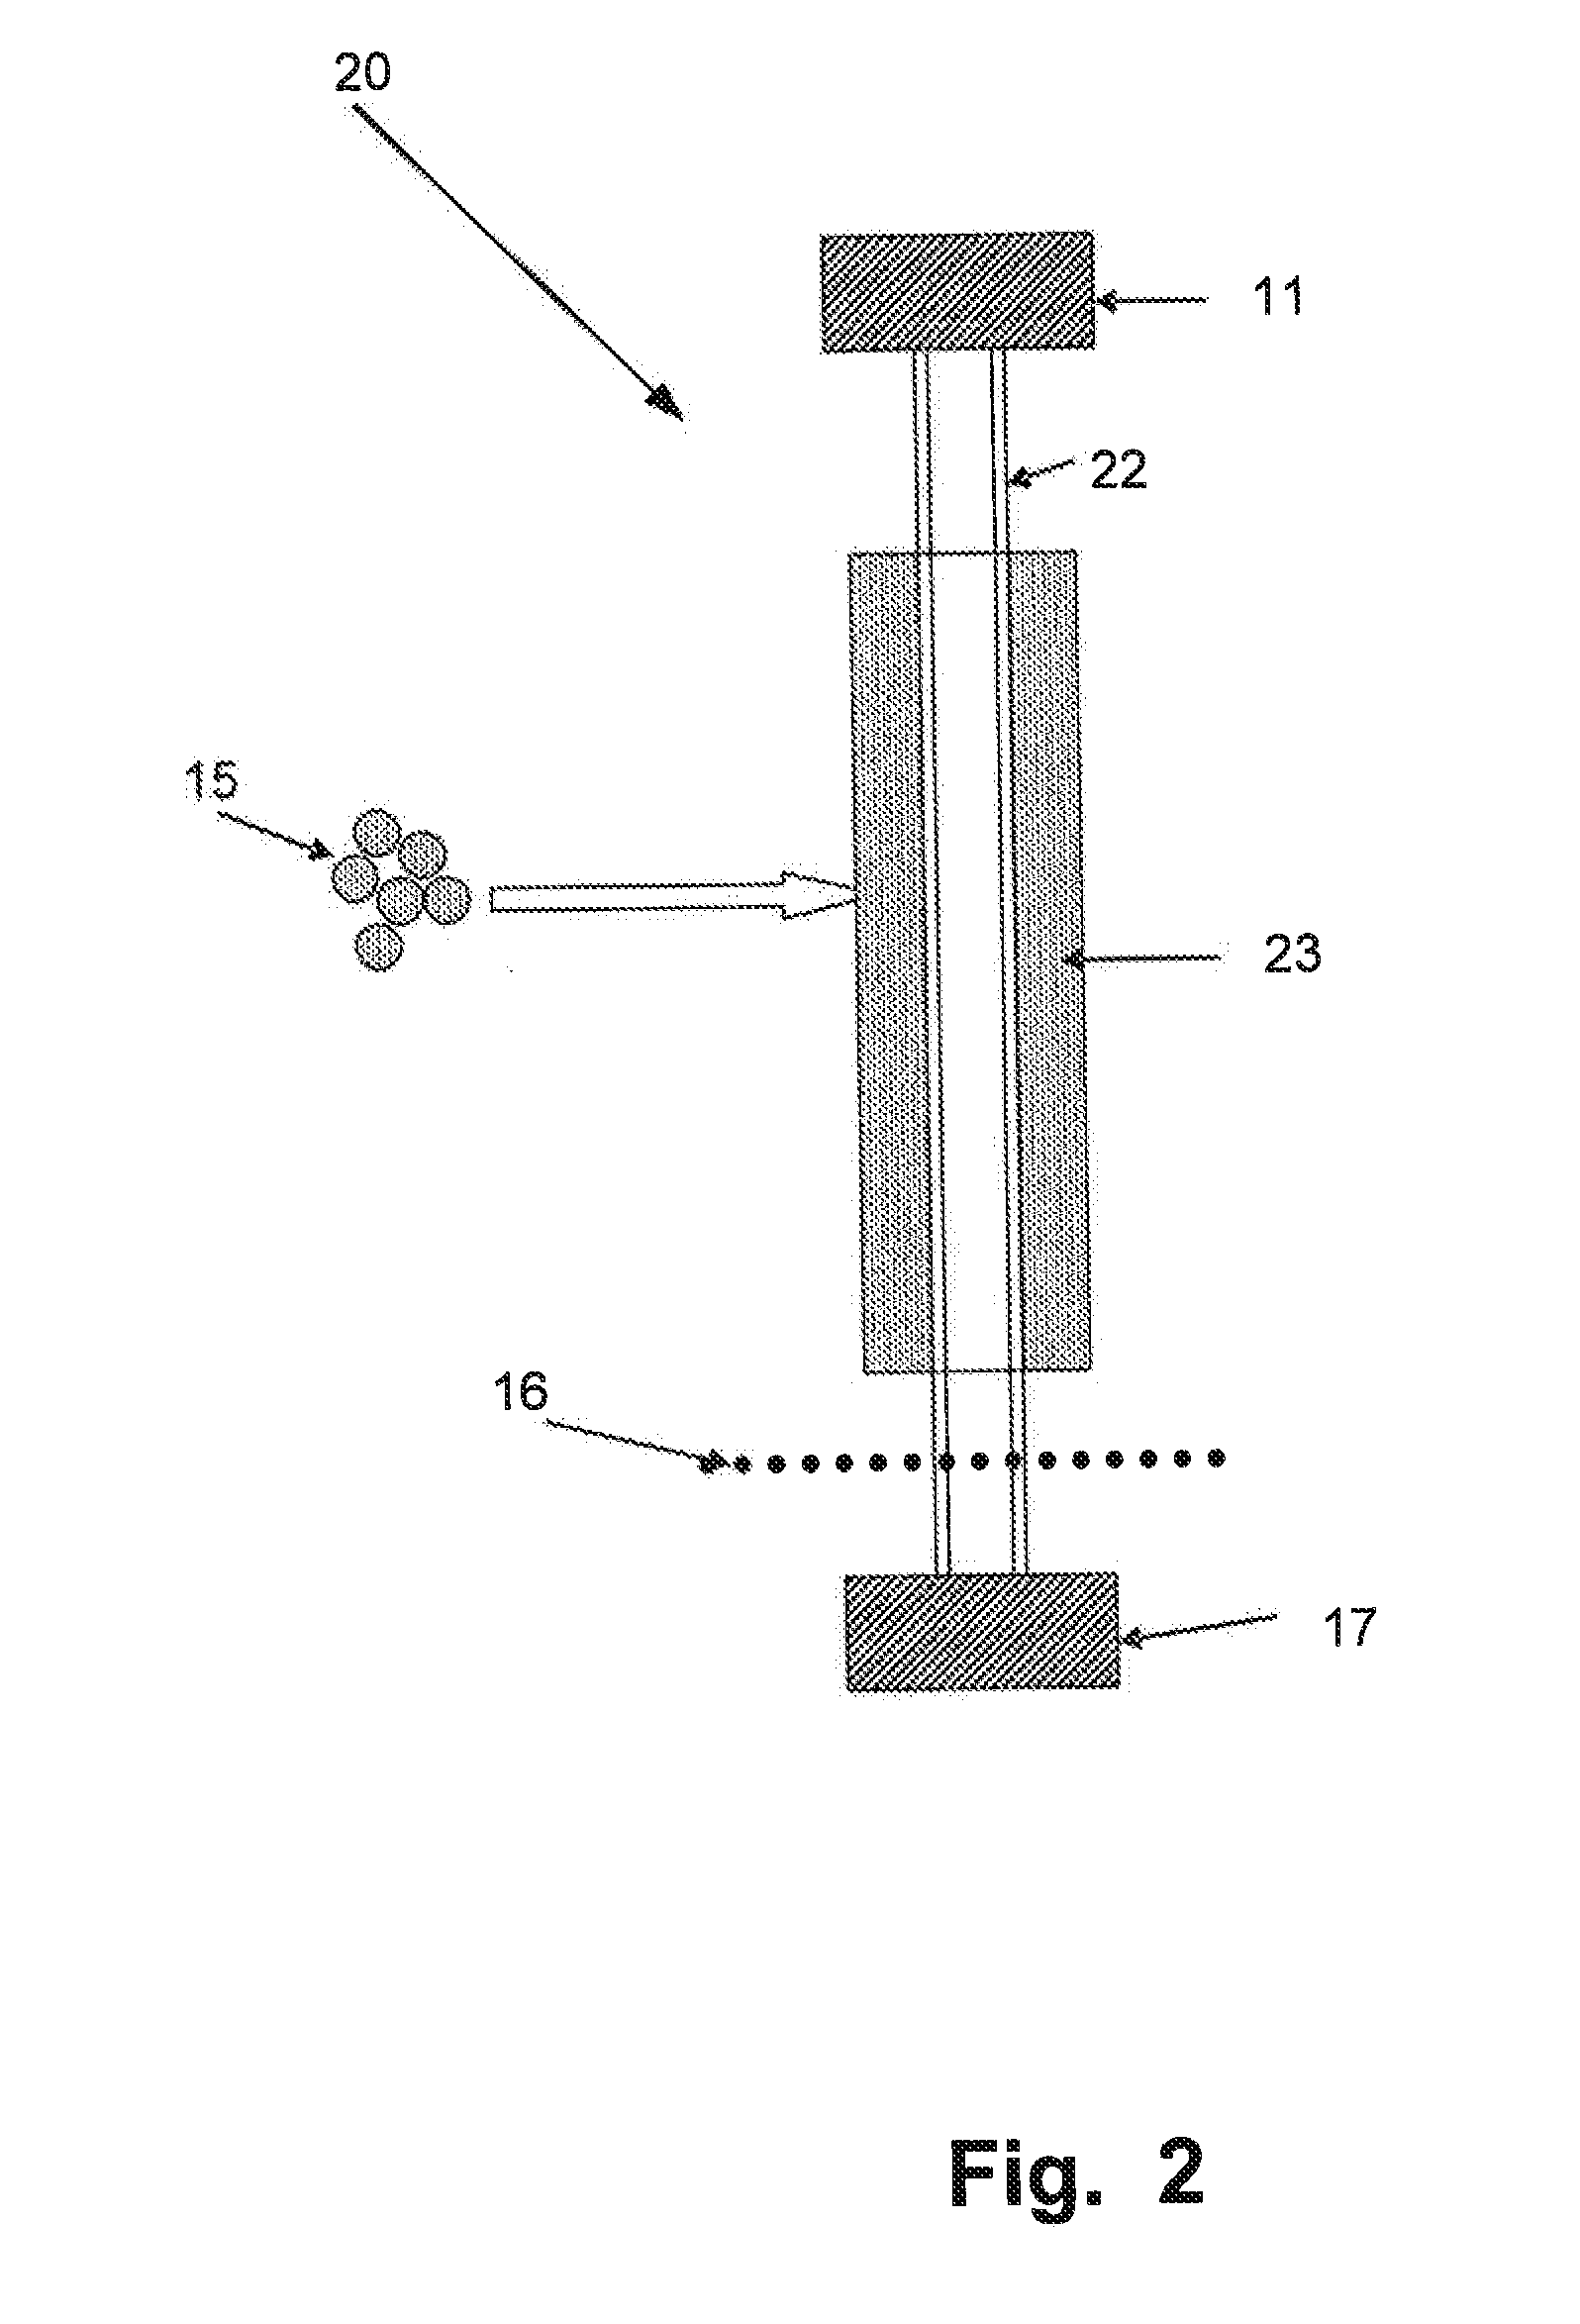 Vehicle Interlocking System and Method Based on Detection of Analytes in Exhaled Breath